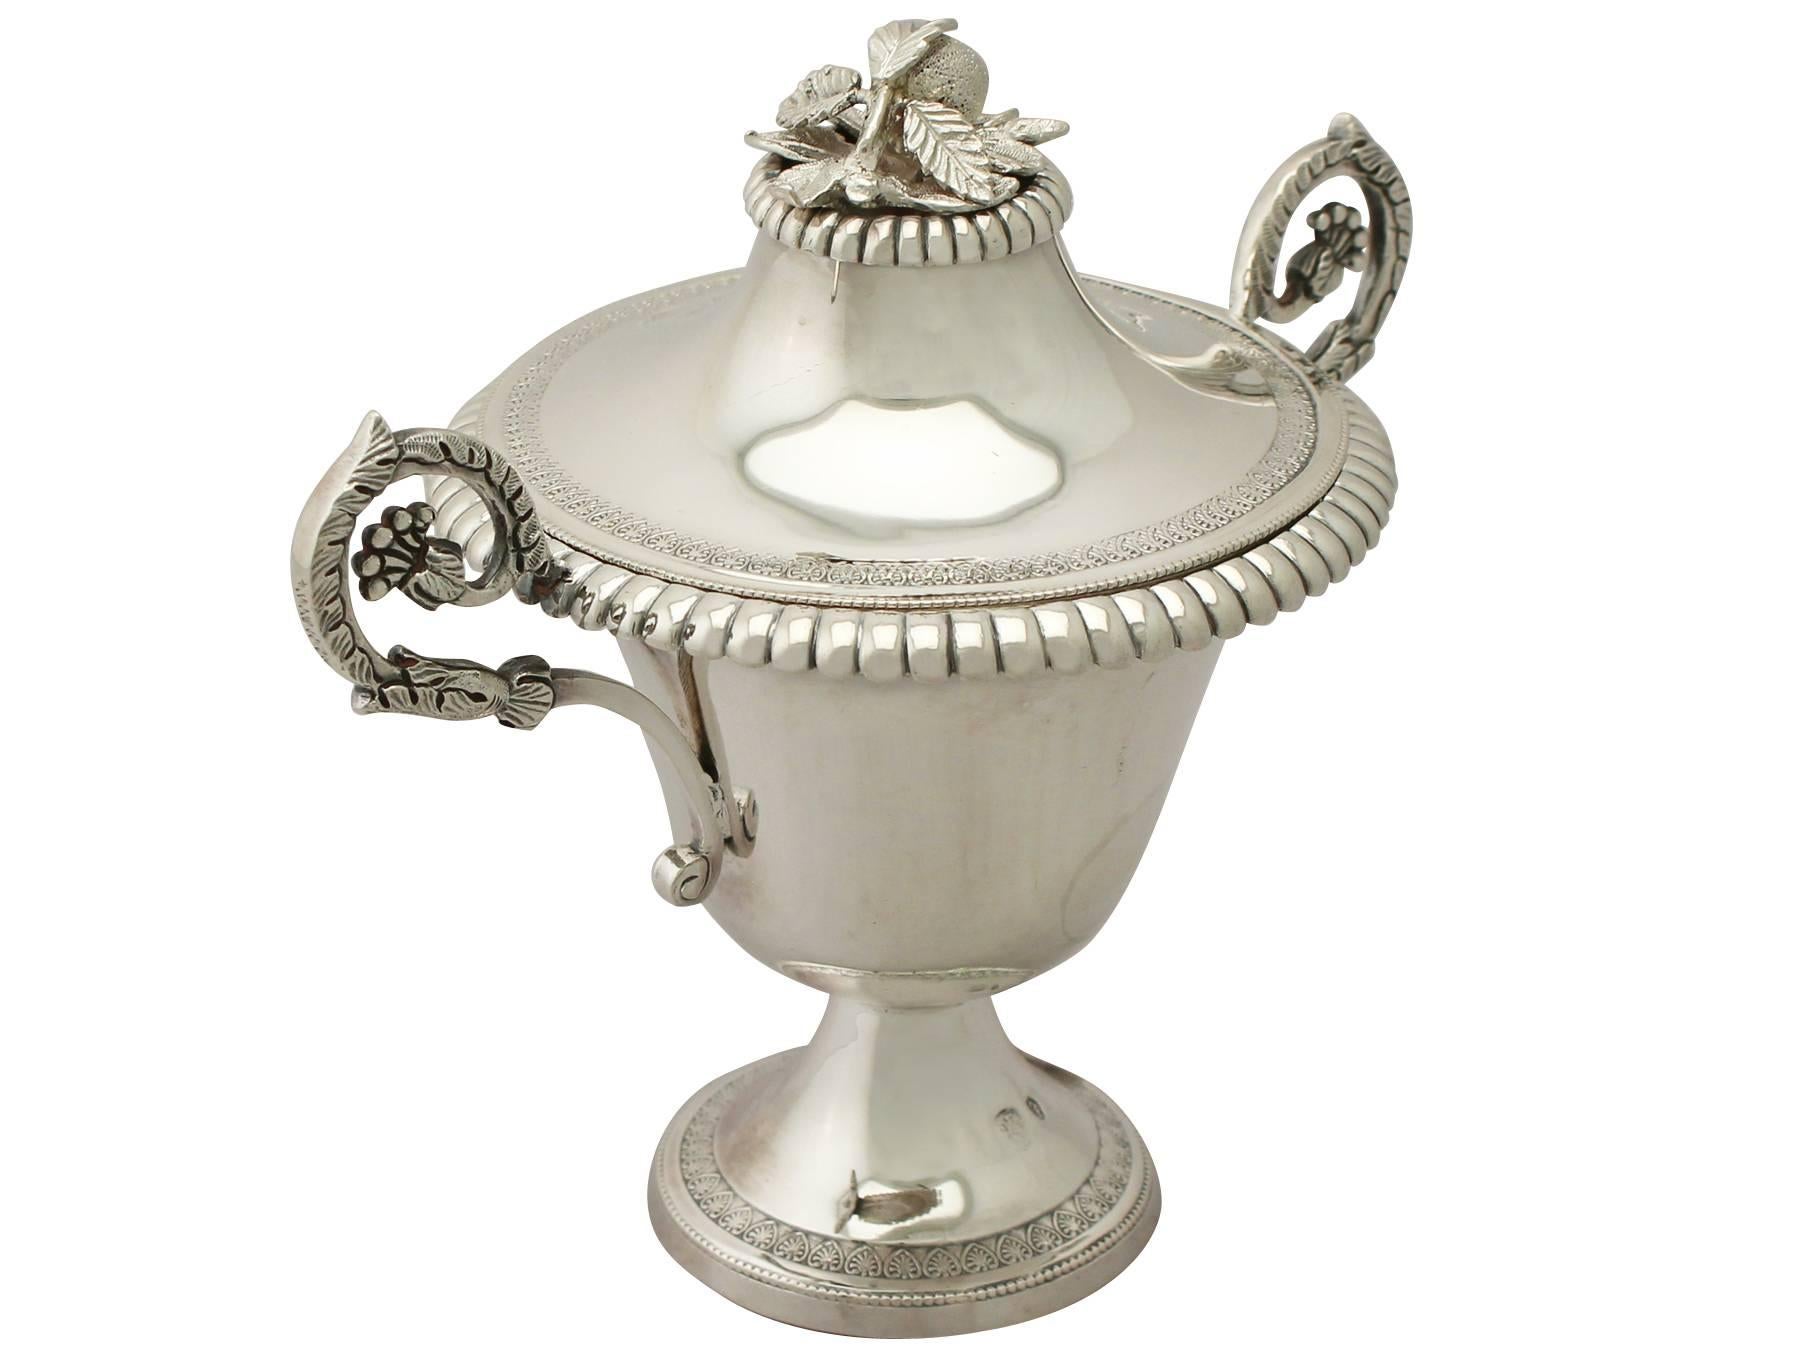 A fine and impressive antique Turkish silver cup and cover; an addition to our continental silverware collection.

This fine antique Turkish silver cup and cover has a plain bell shaped form to a spreading pedestal foot.

The The surface of this